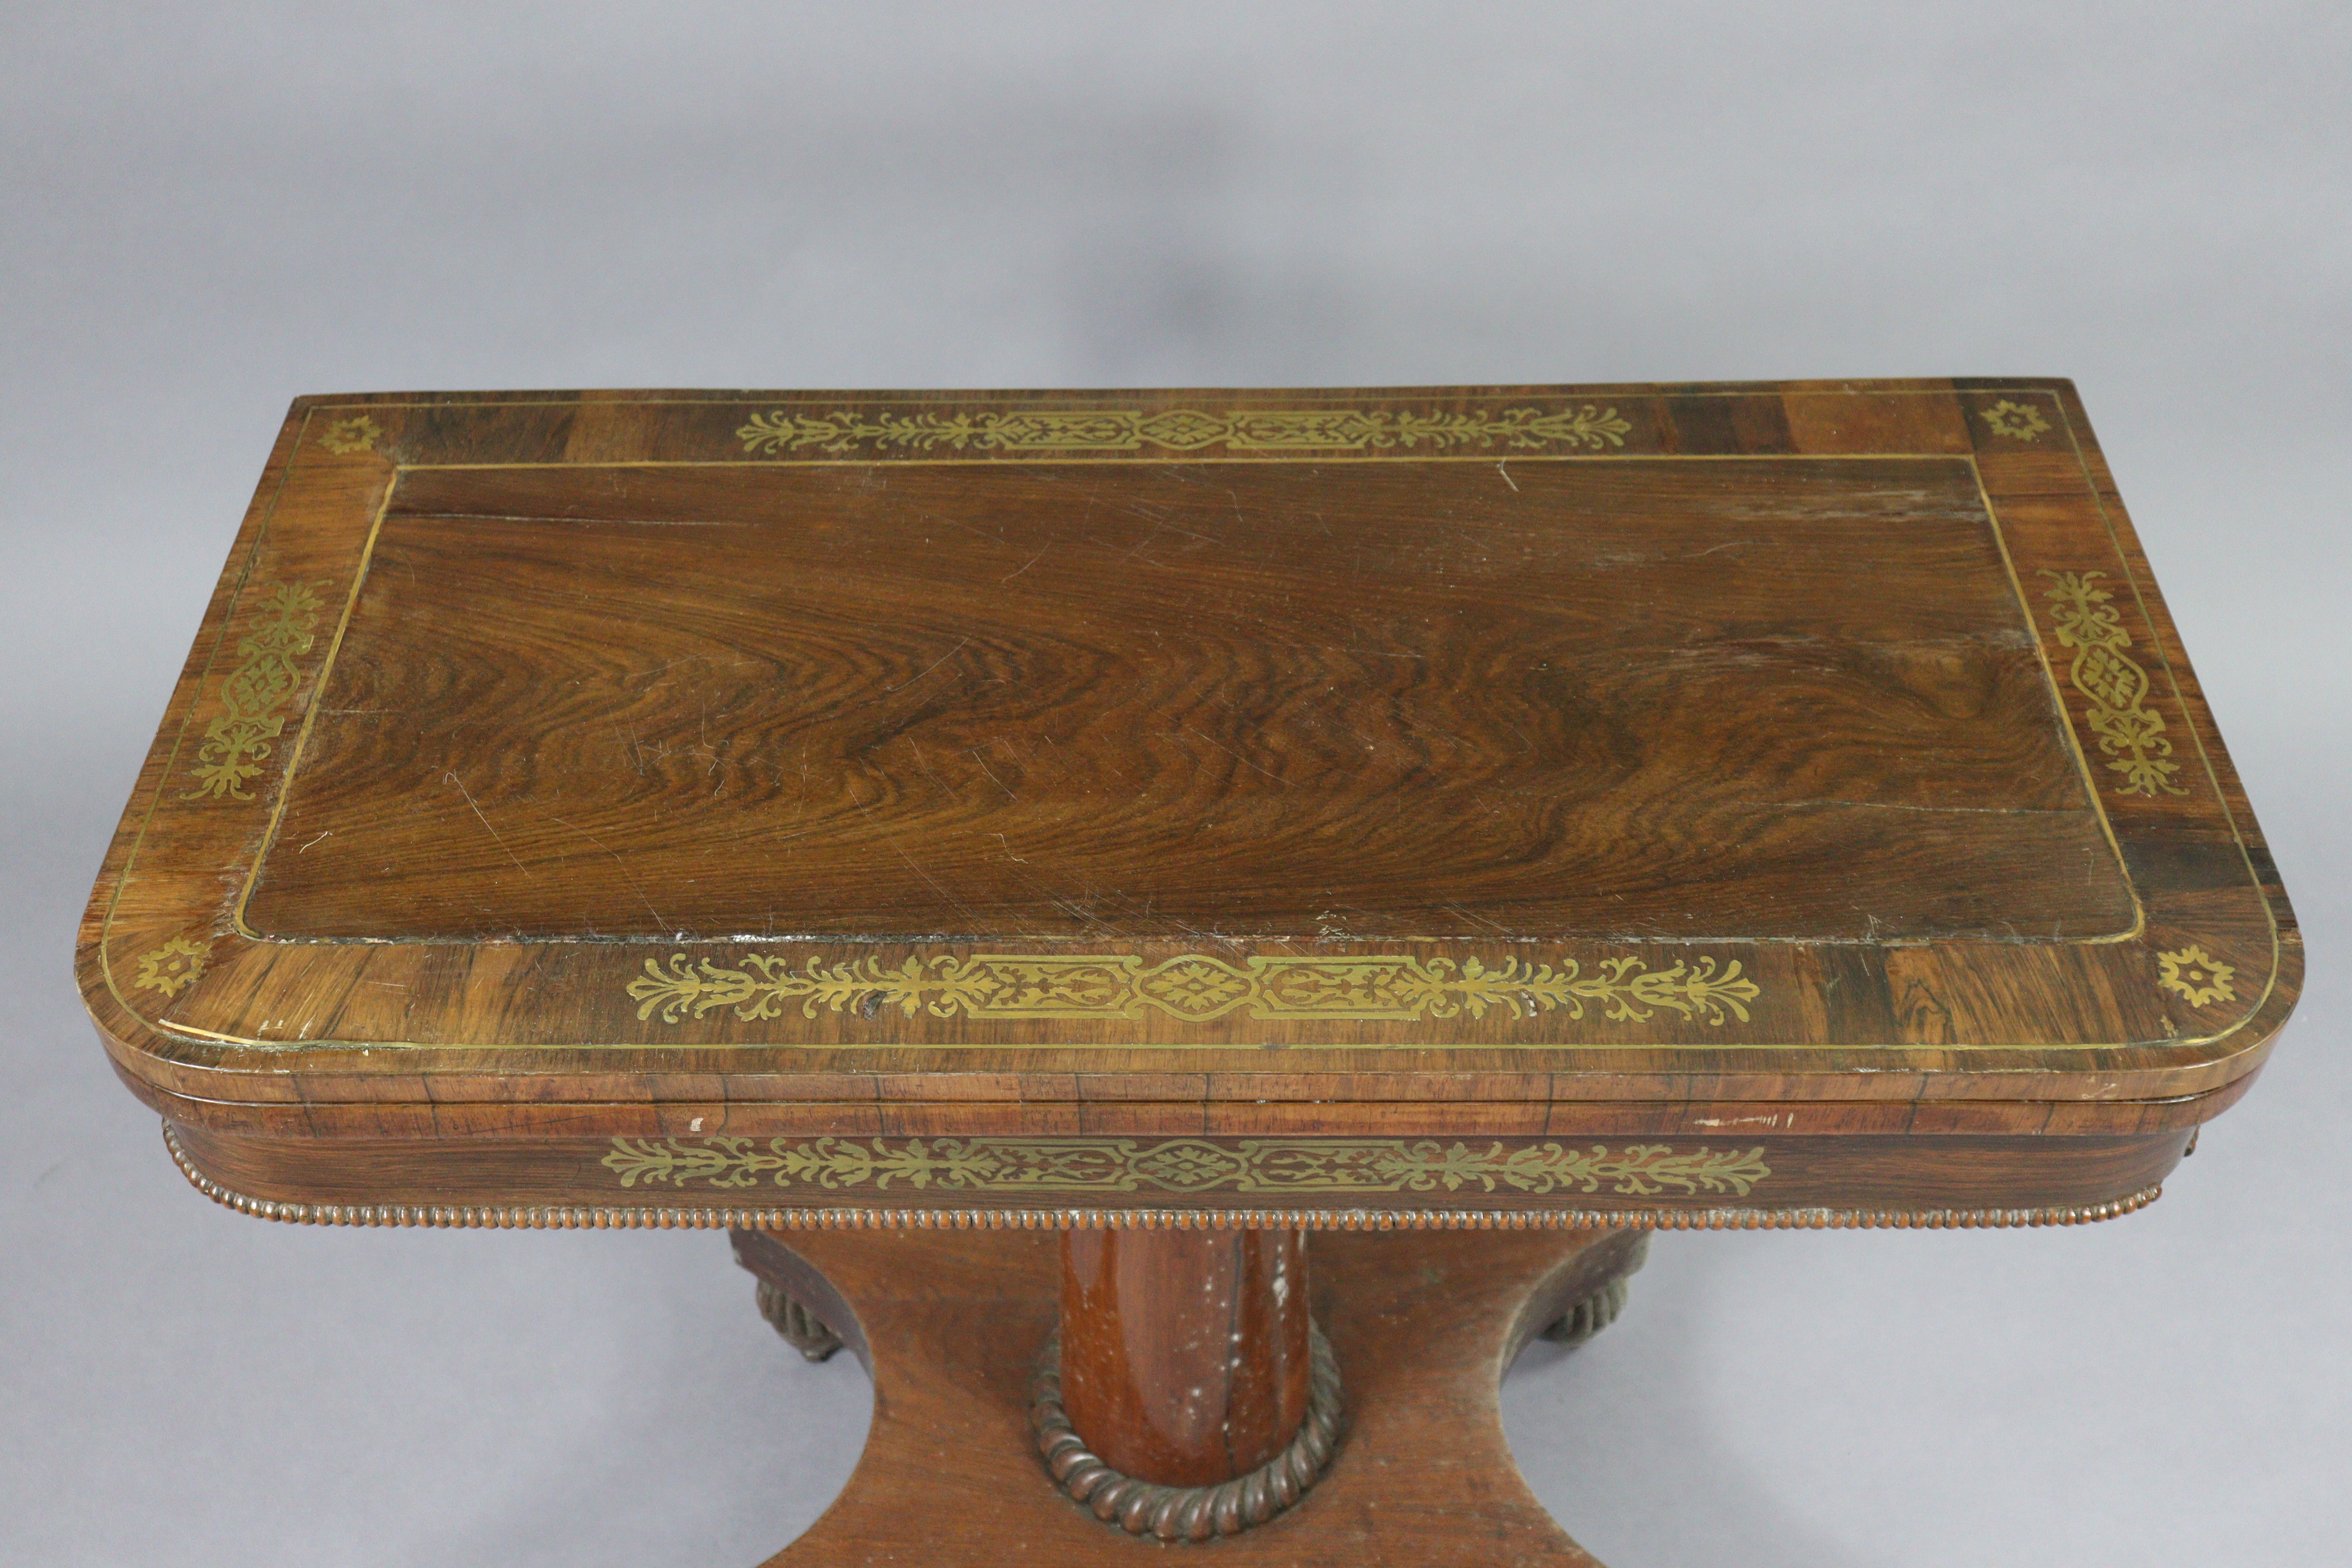 An early 19th century brass-inlaid card table, with rounded corners to the rectangular top, inset gr - Image 2 of 5